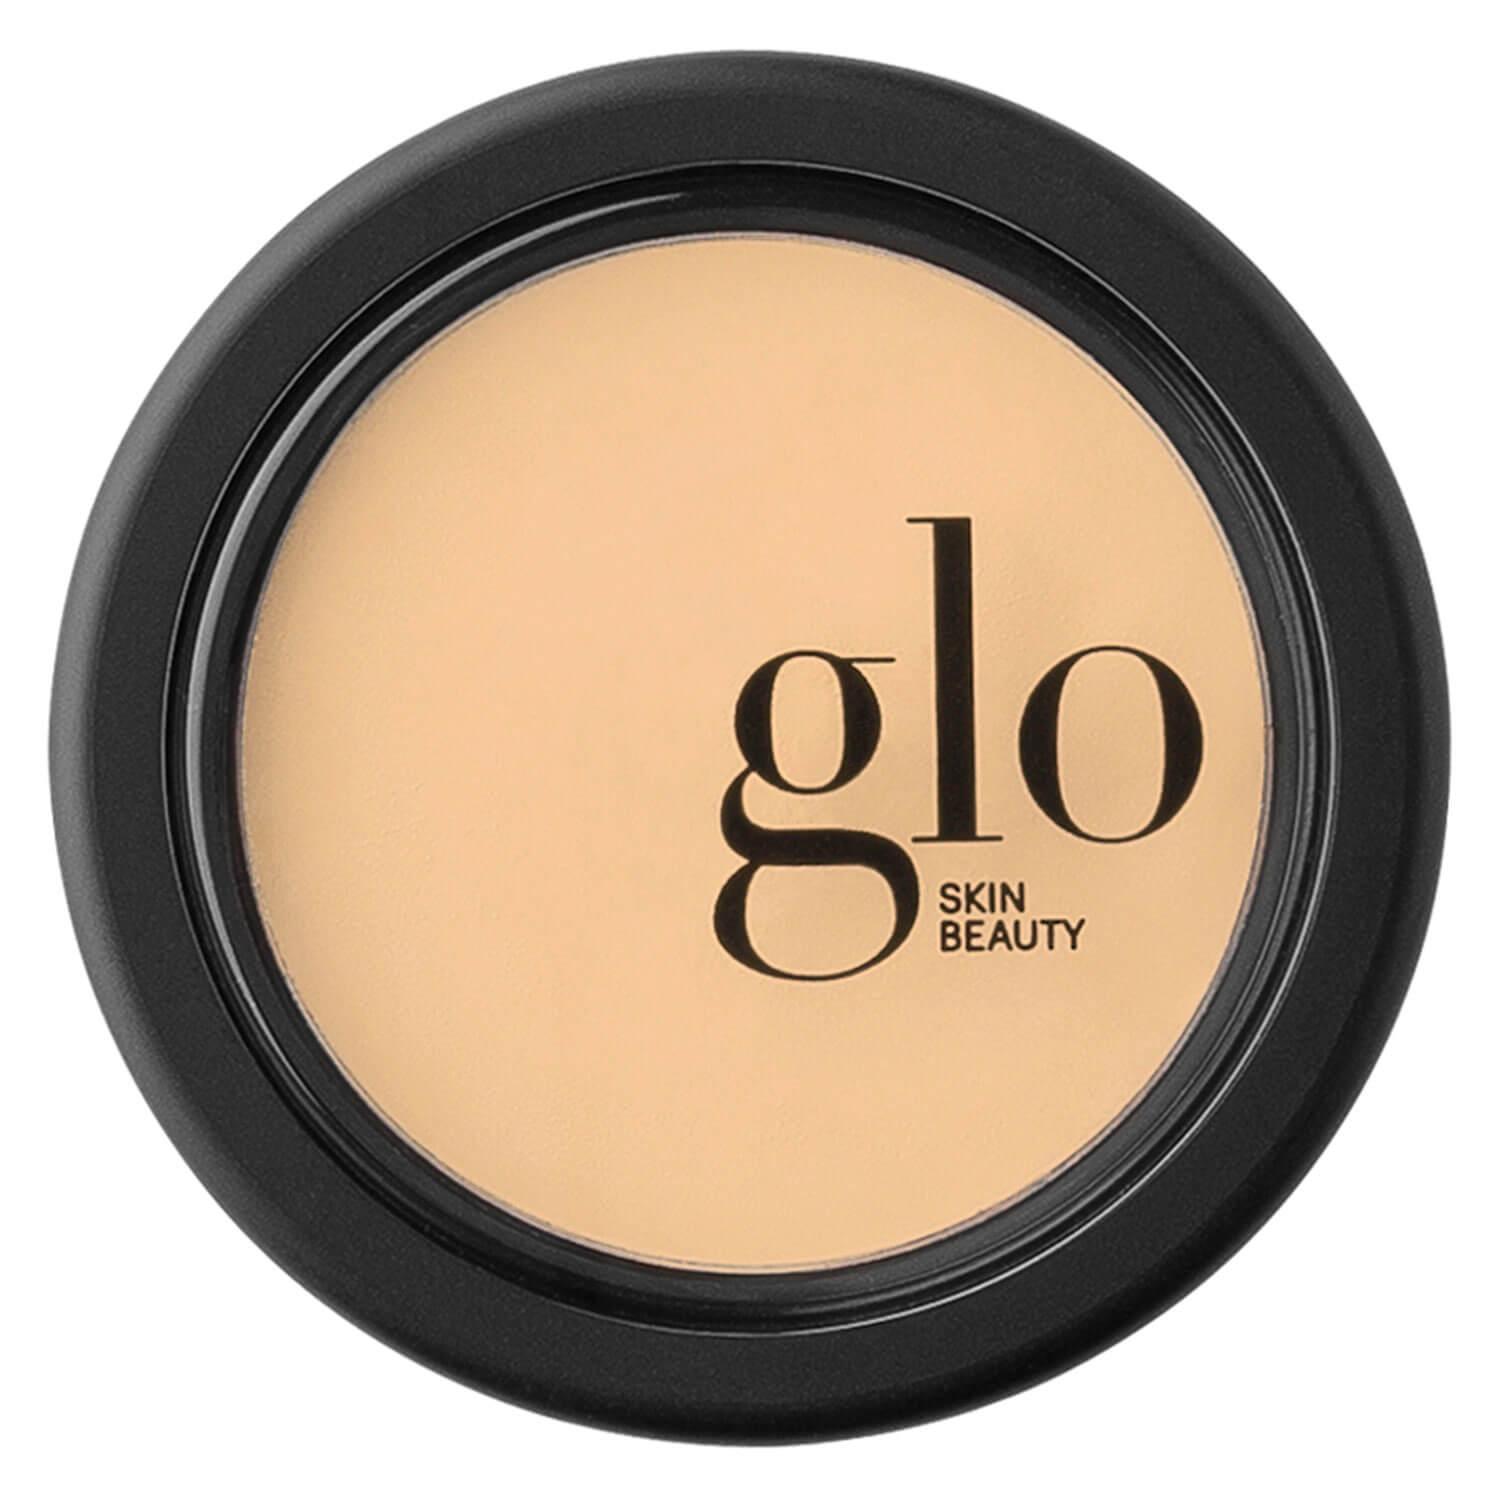 Glo Skin Beauty Camouflage - Oil Free Camouflage Golden